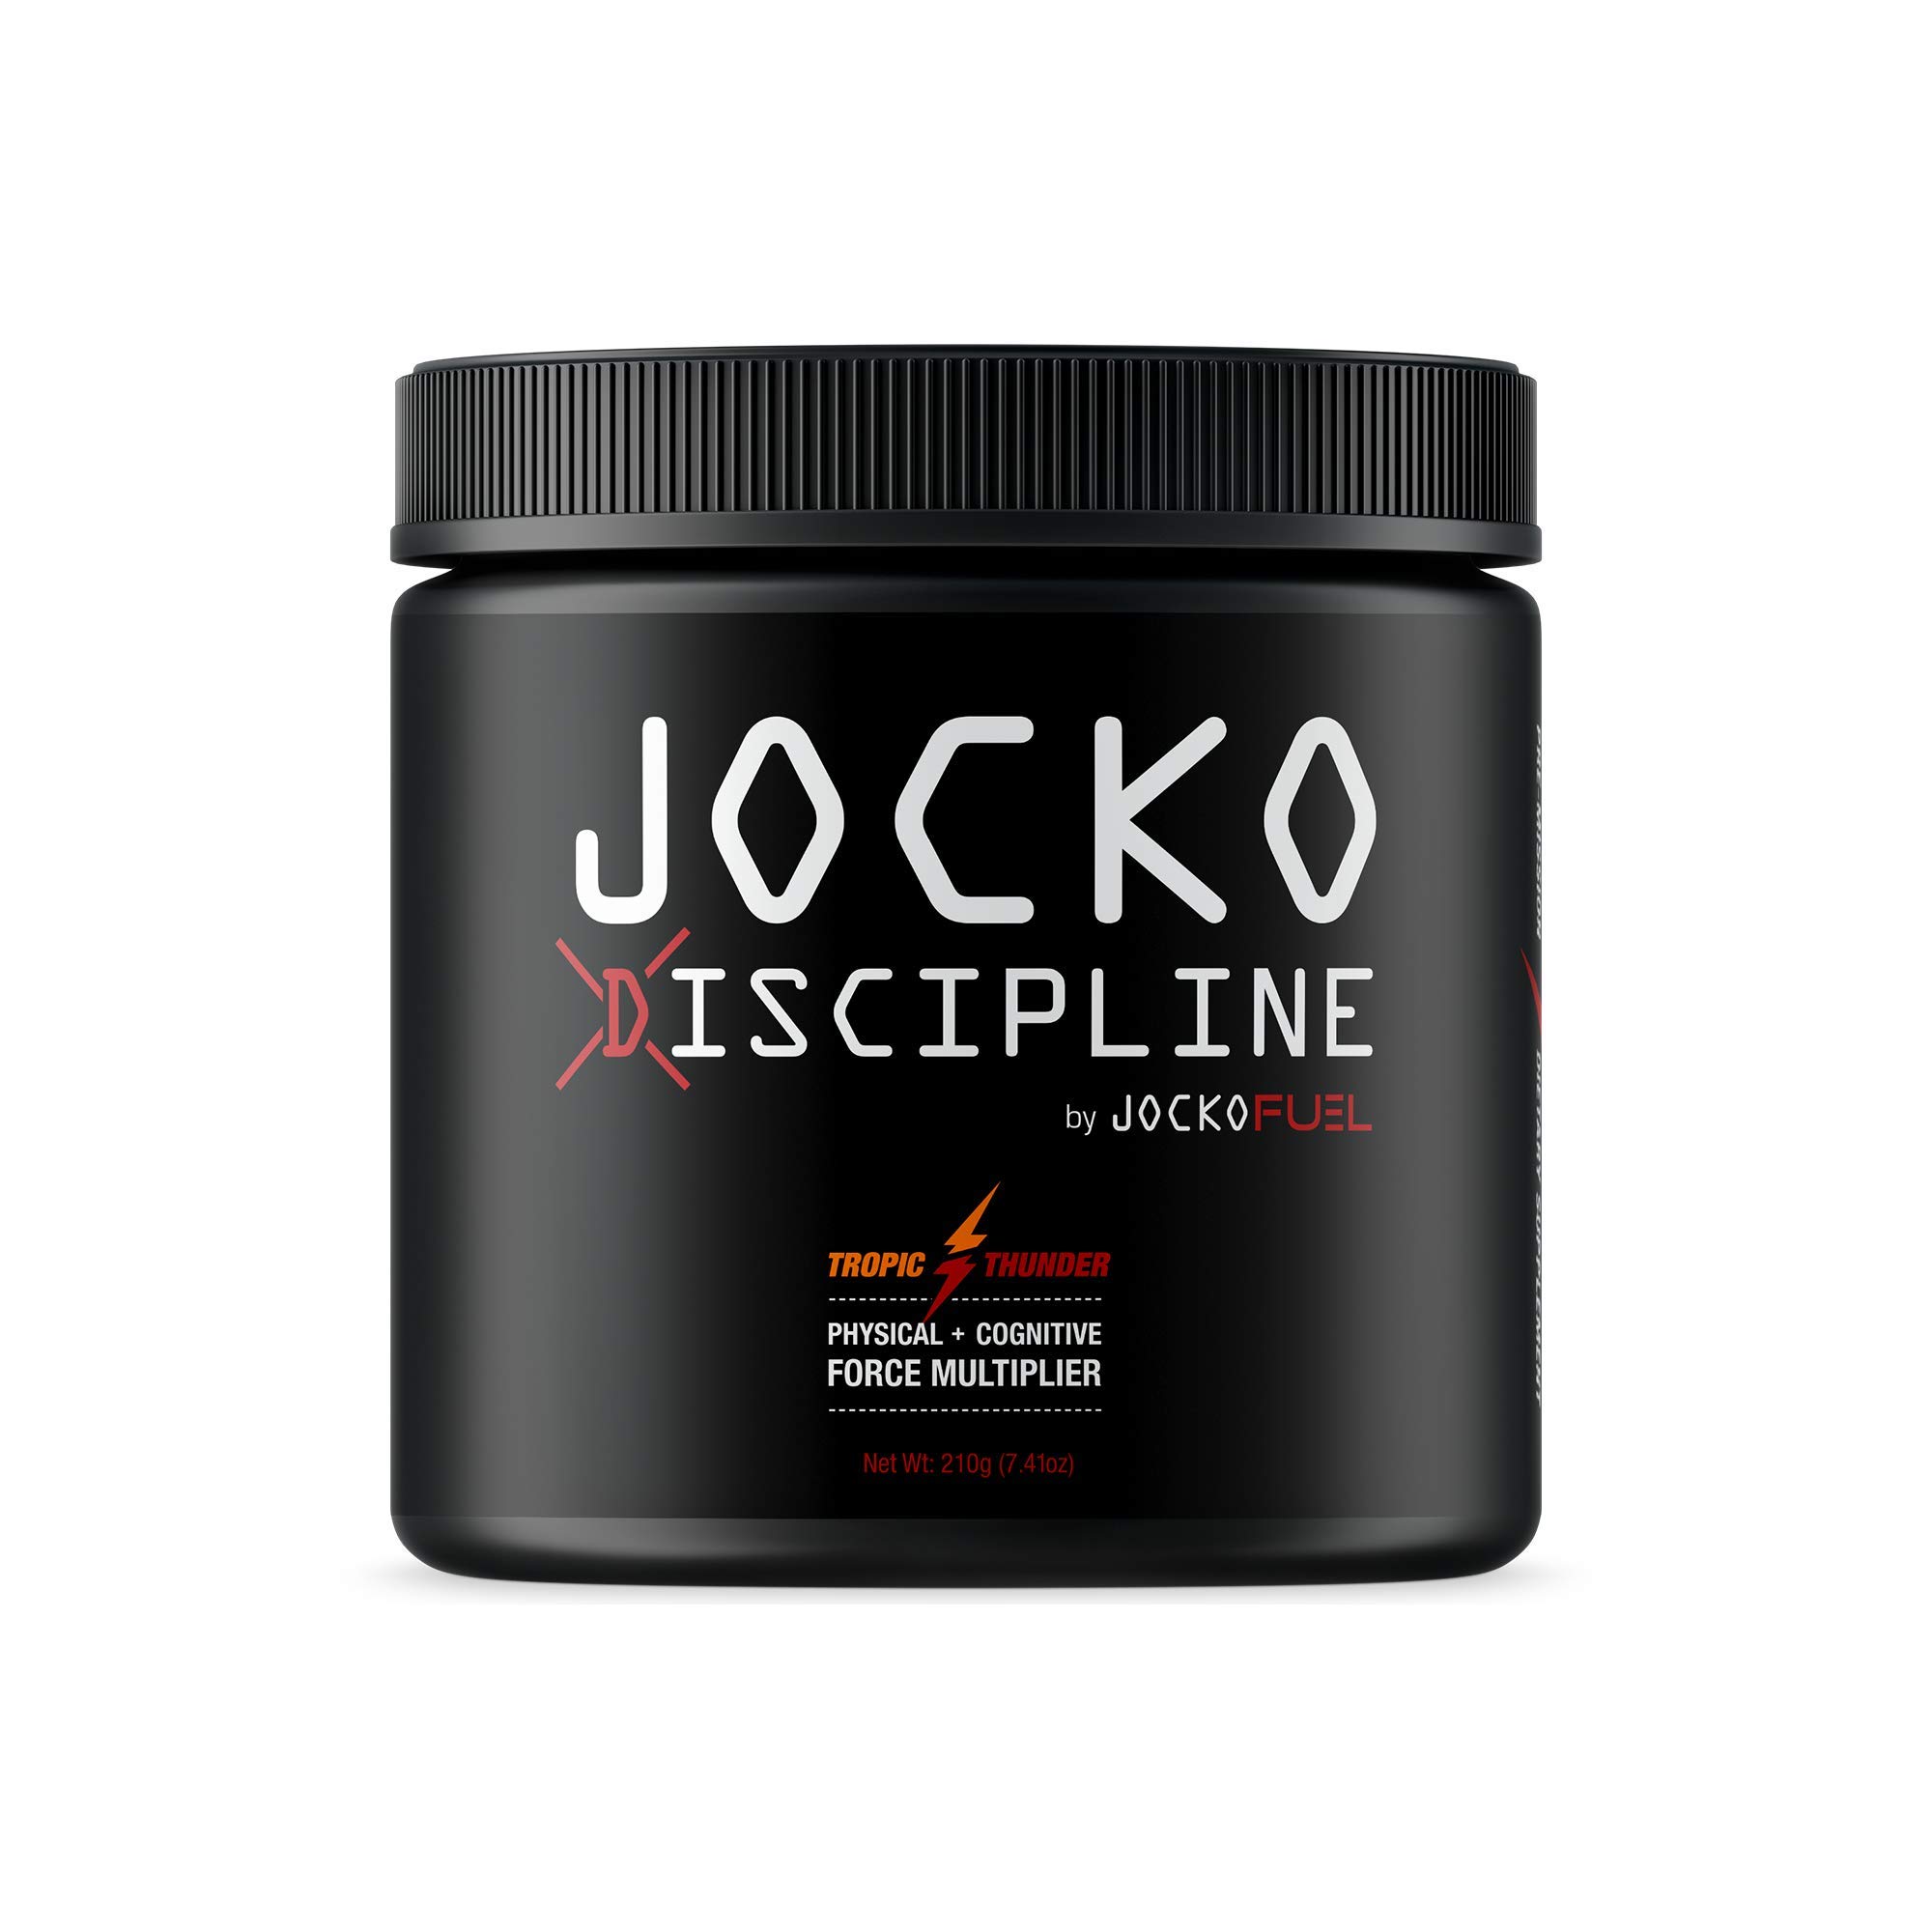 Book Cover Jocko Fuel Pre Workout Powder (Tropic Thunder) | PreWorkout Energy Powder Drink | Pre Workout for Men & Women | KETO, Vitamin C, Sugar Free Blend to Support Muscle Pump, Endurance & Recovery - 30 Servings